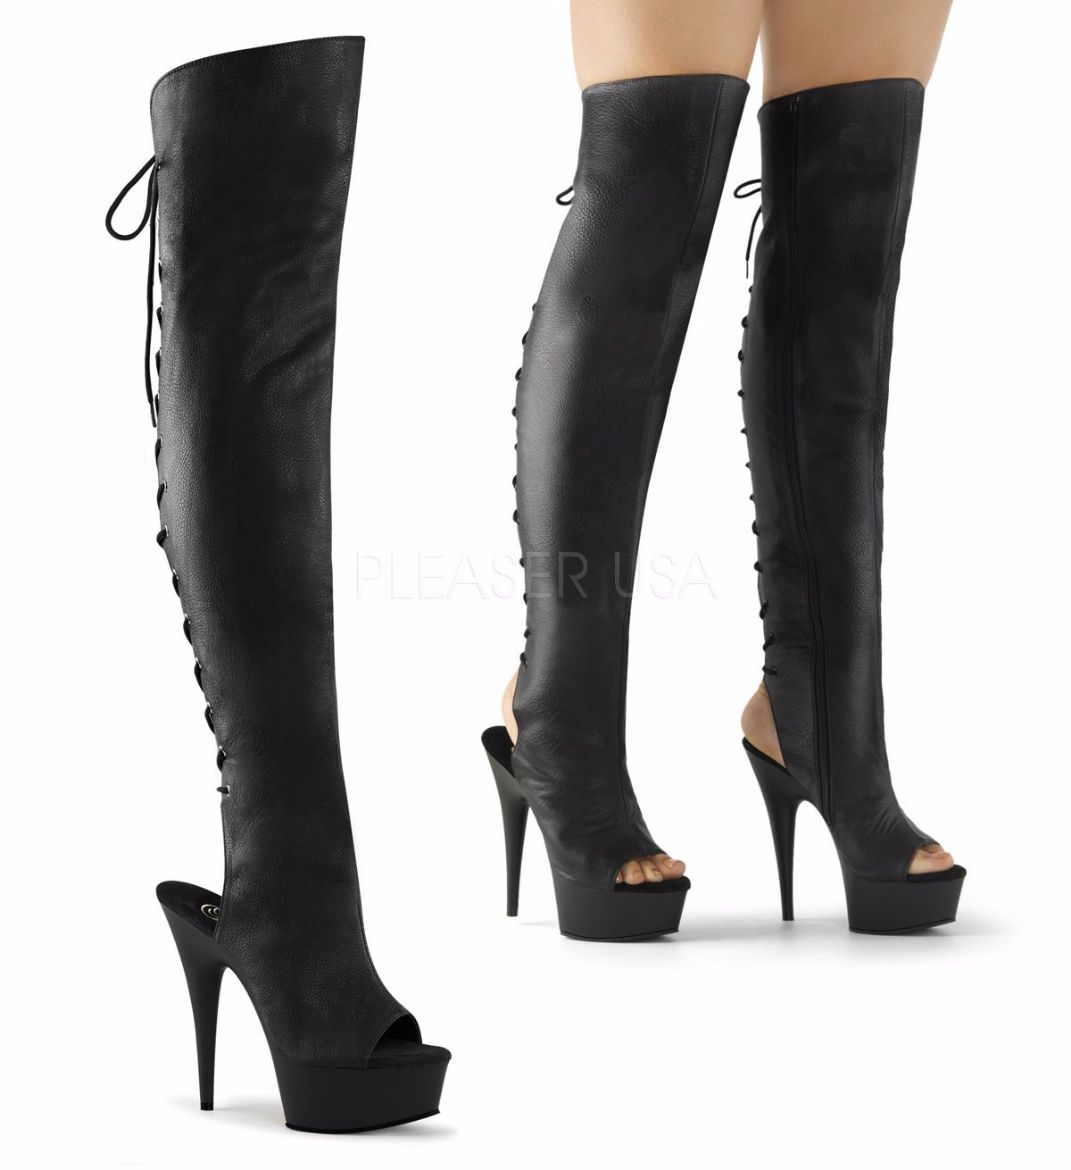 Product image of Pleaser Delight-3019 Black Faux Leather/Black Matte, 6 inch (15.2 cm) Heel, 1 3/4 inch (4.4 cm) Platform Thigh High Boot